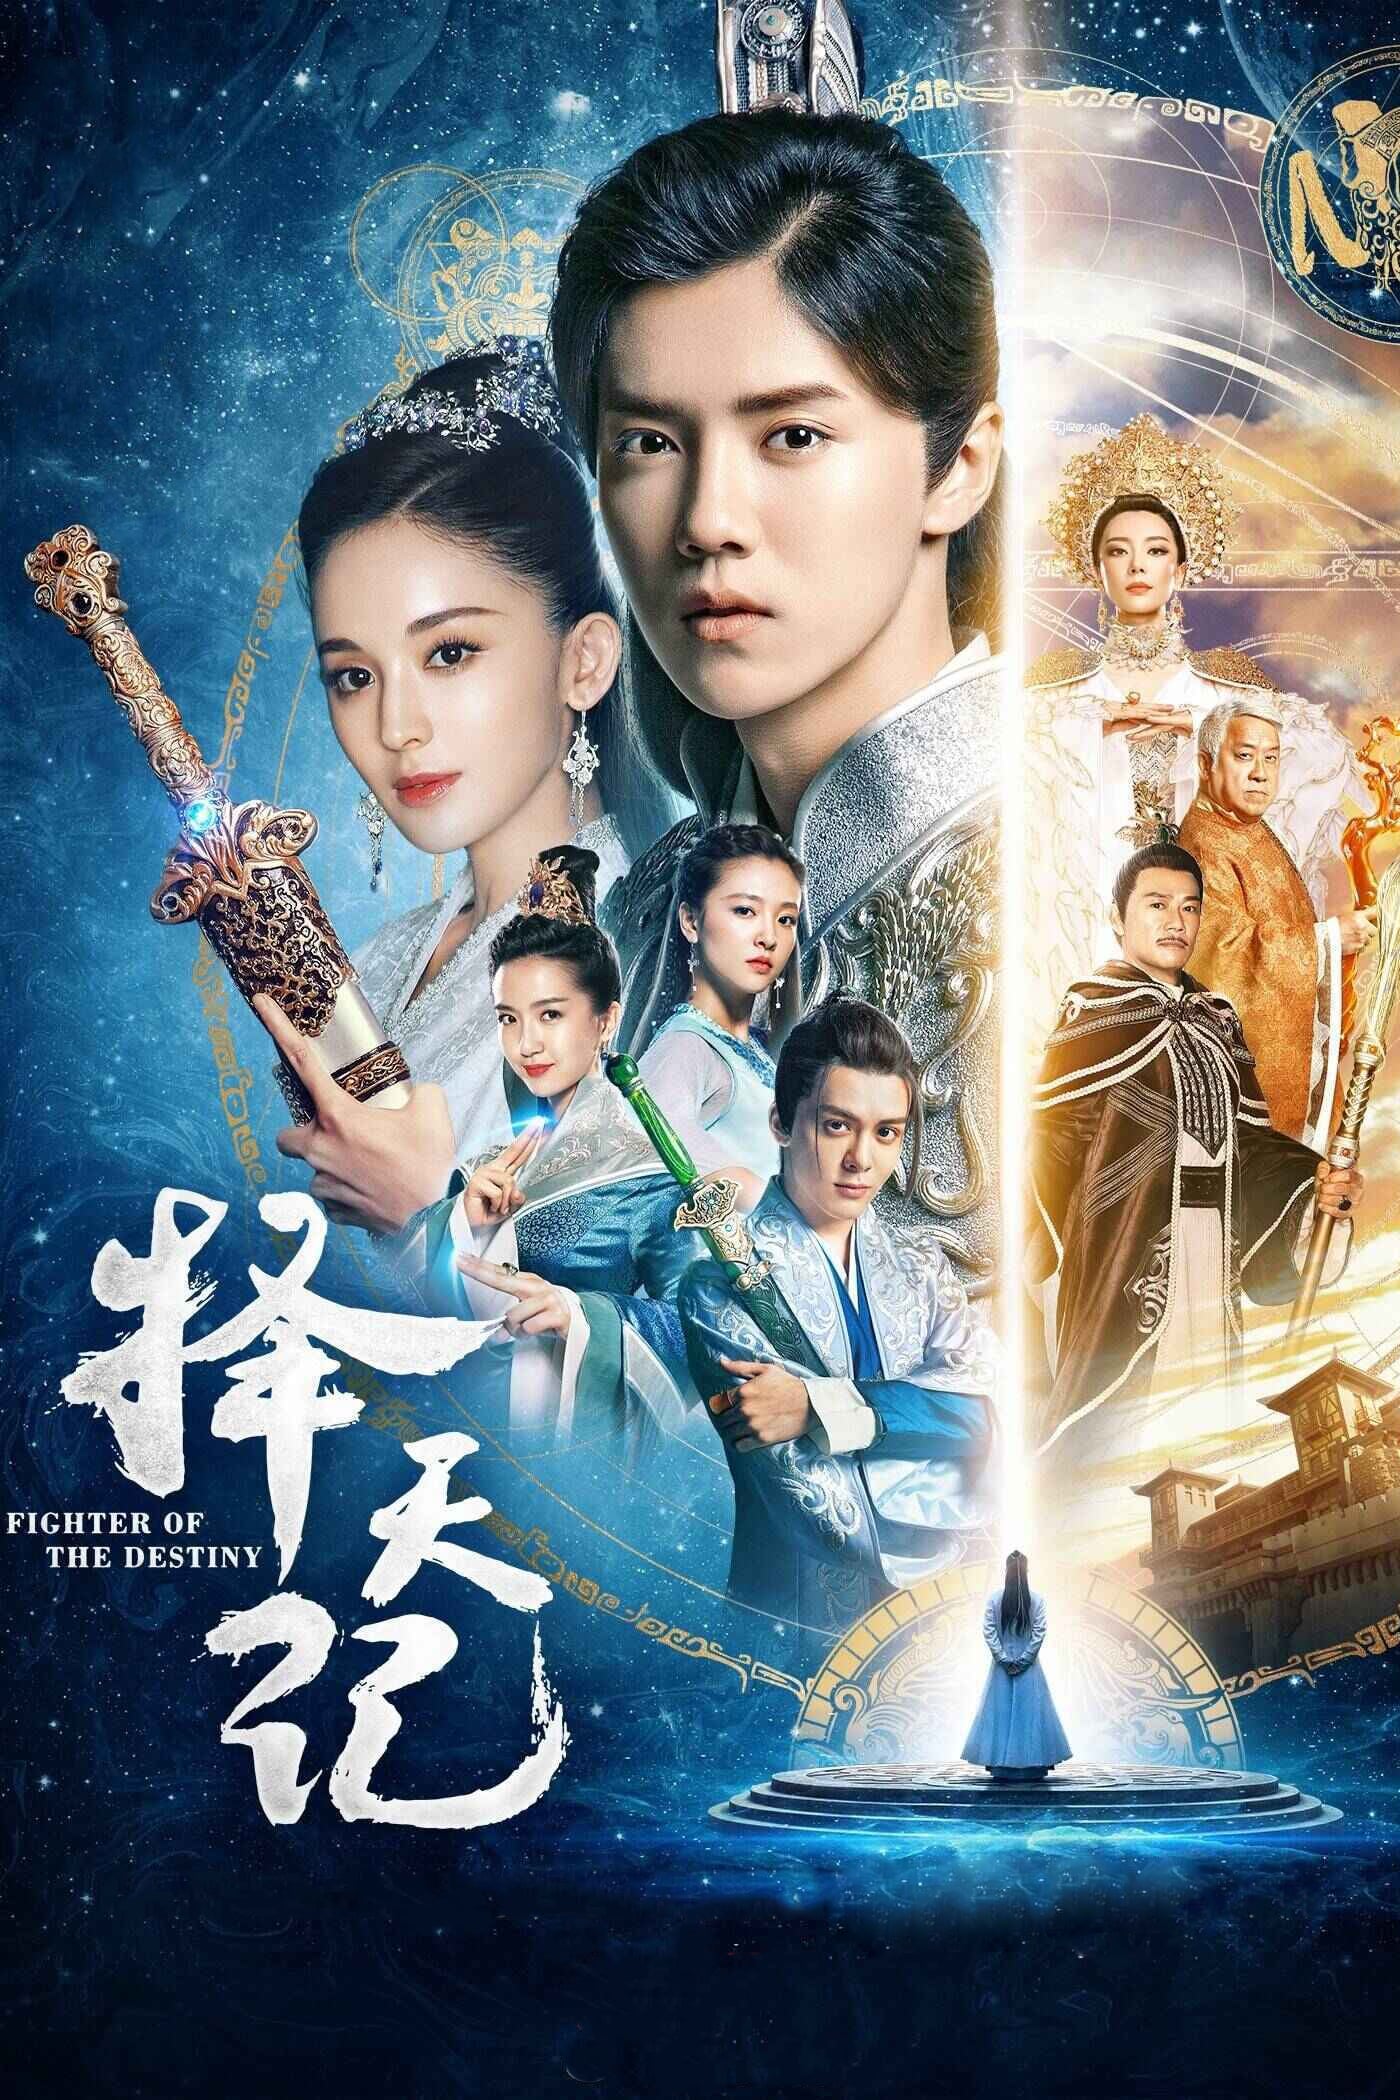 Fighter of the Destiny (2017)